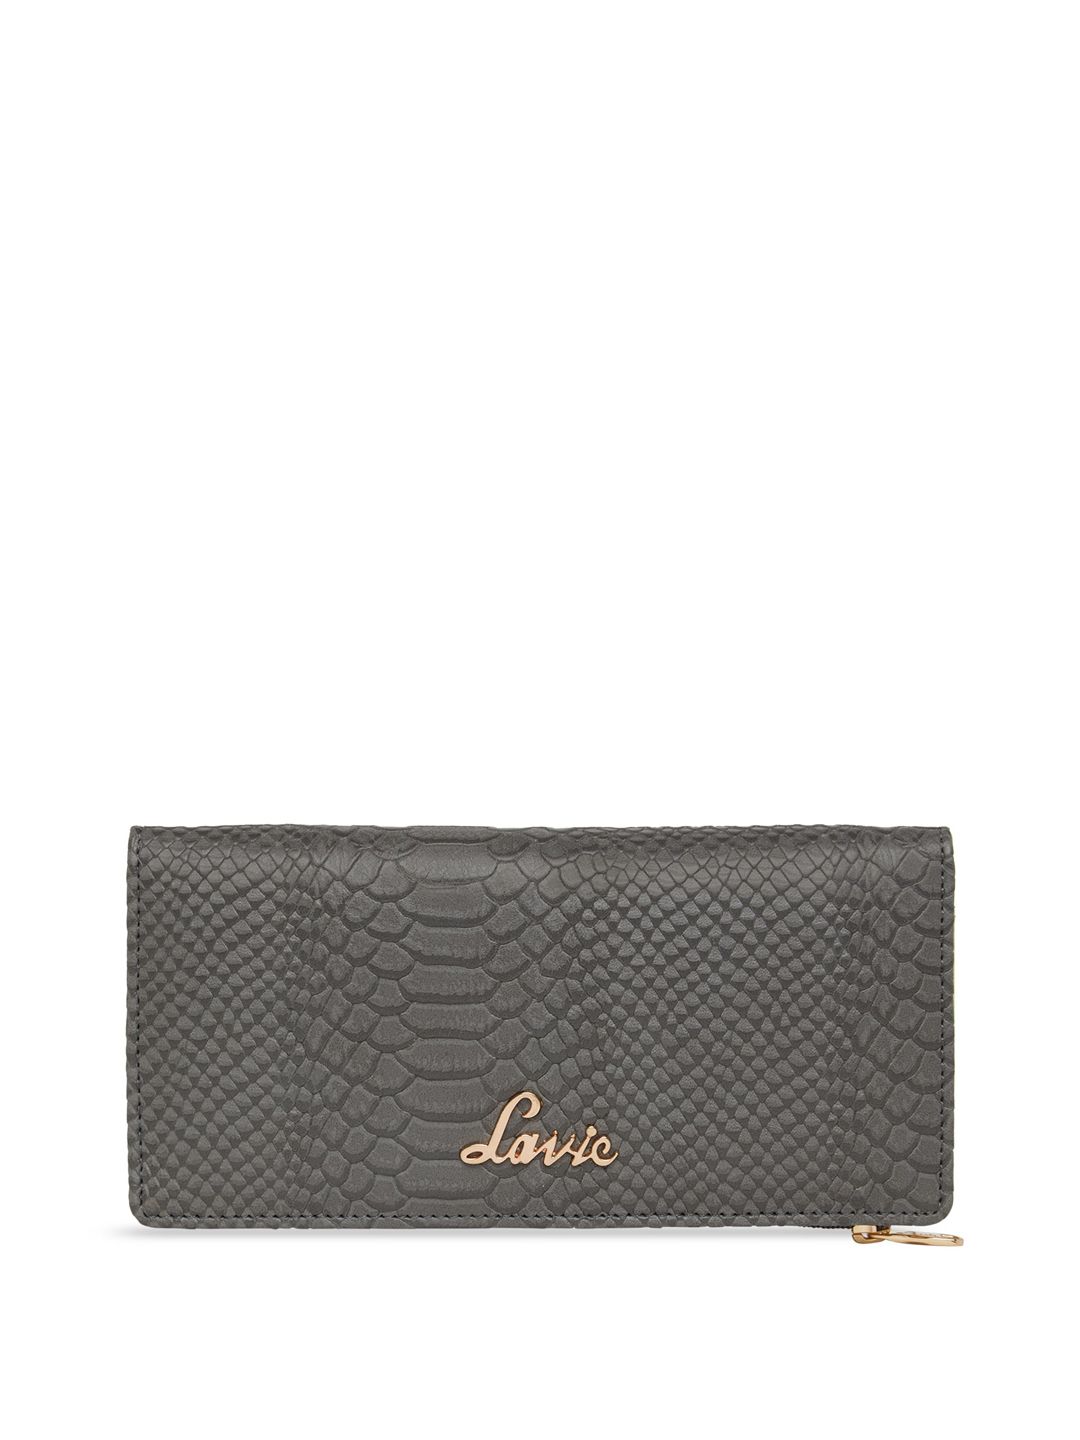 Lavie Women Grey Textured Two Fold Wallet Price in India